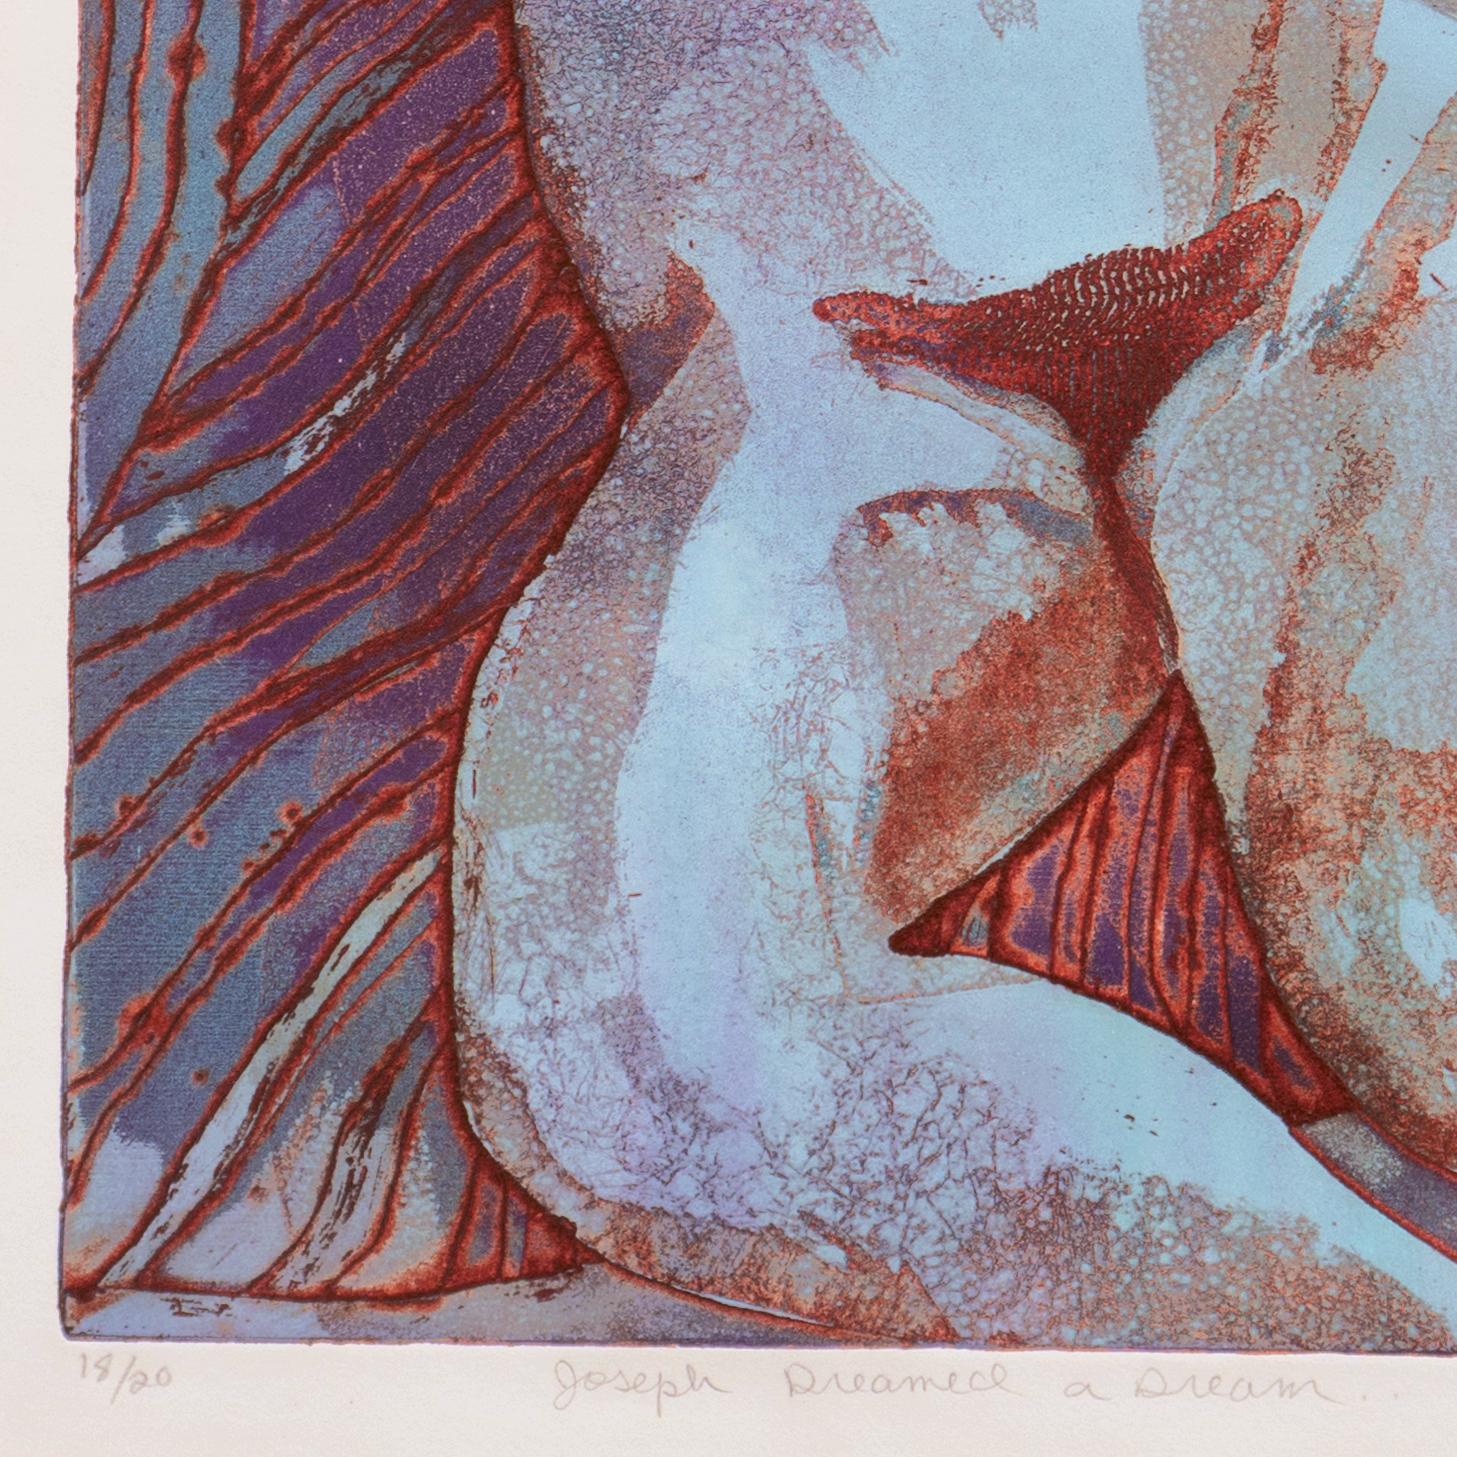 Polychrome etching and sugar-lift aquatint. 
Signed lower right, 'Ruth Weisberg' (American, born 1942) and dated 1967; additionally titled, lower center, 'Joseph Dreamed a Dream' and inscribed, lower left, with number and limitation, '18/20'.
Paper